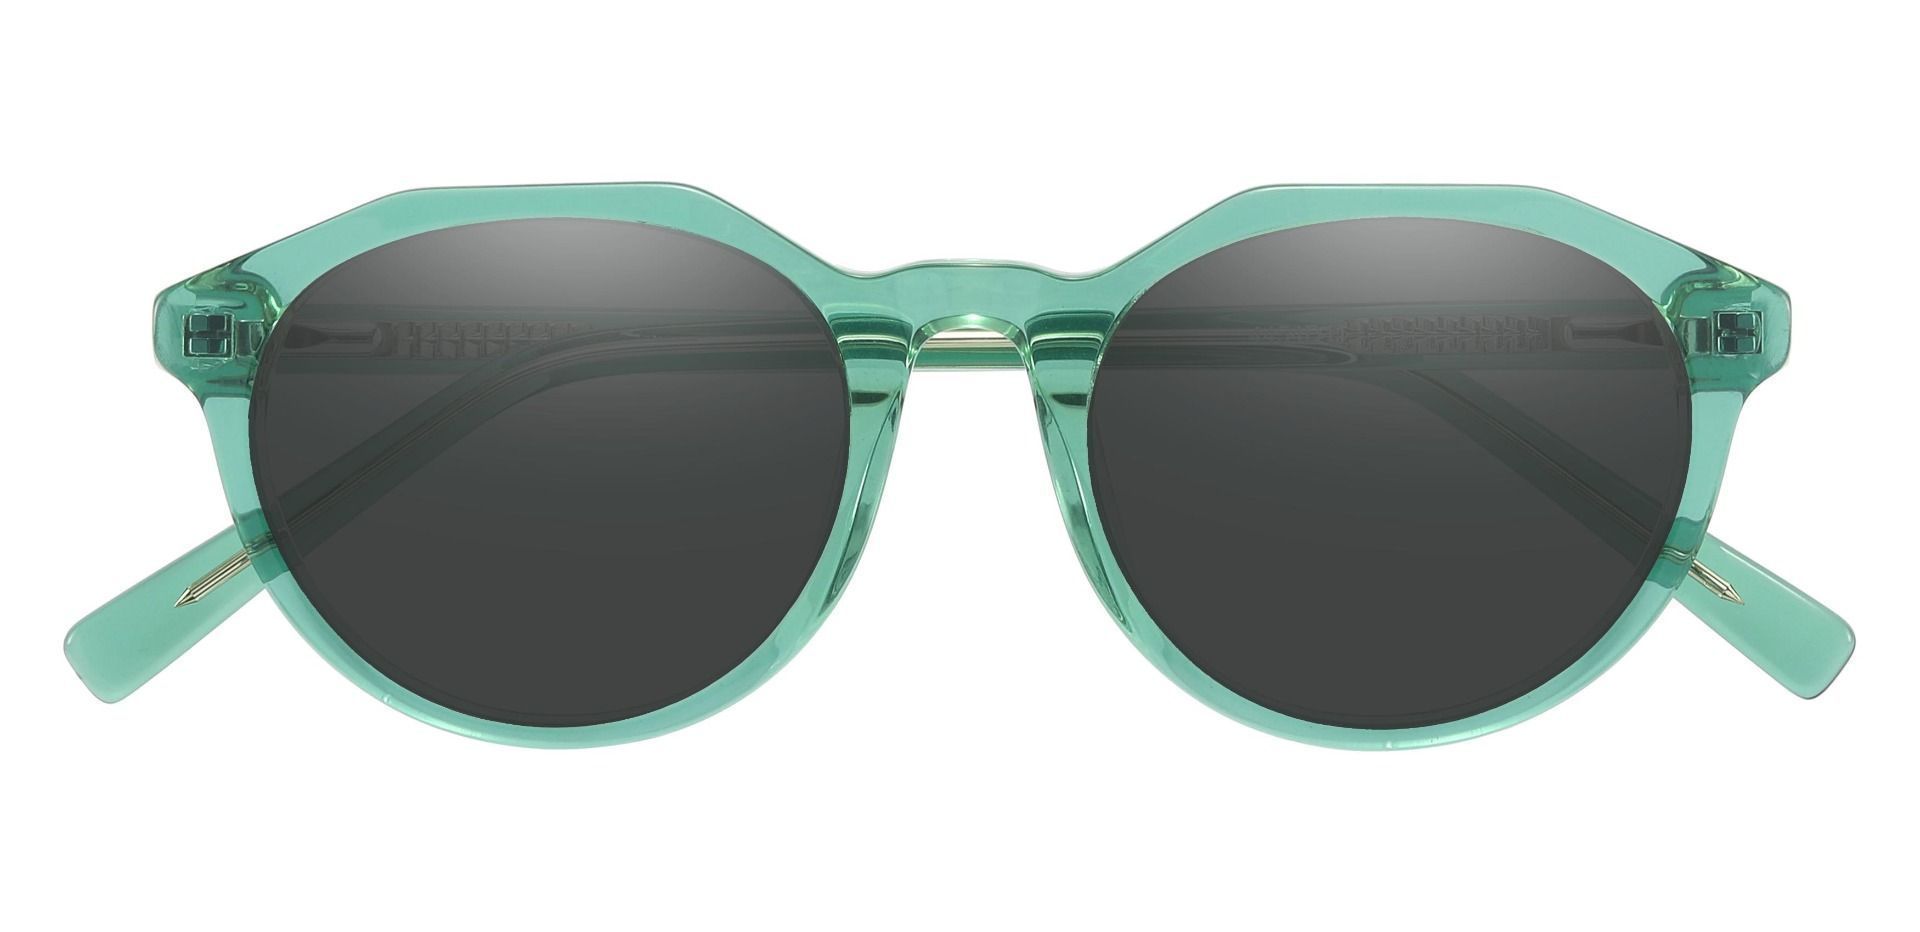 Mayfield Oval Reading Sunglasses - Green Frame With Gray Lenses